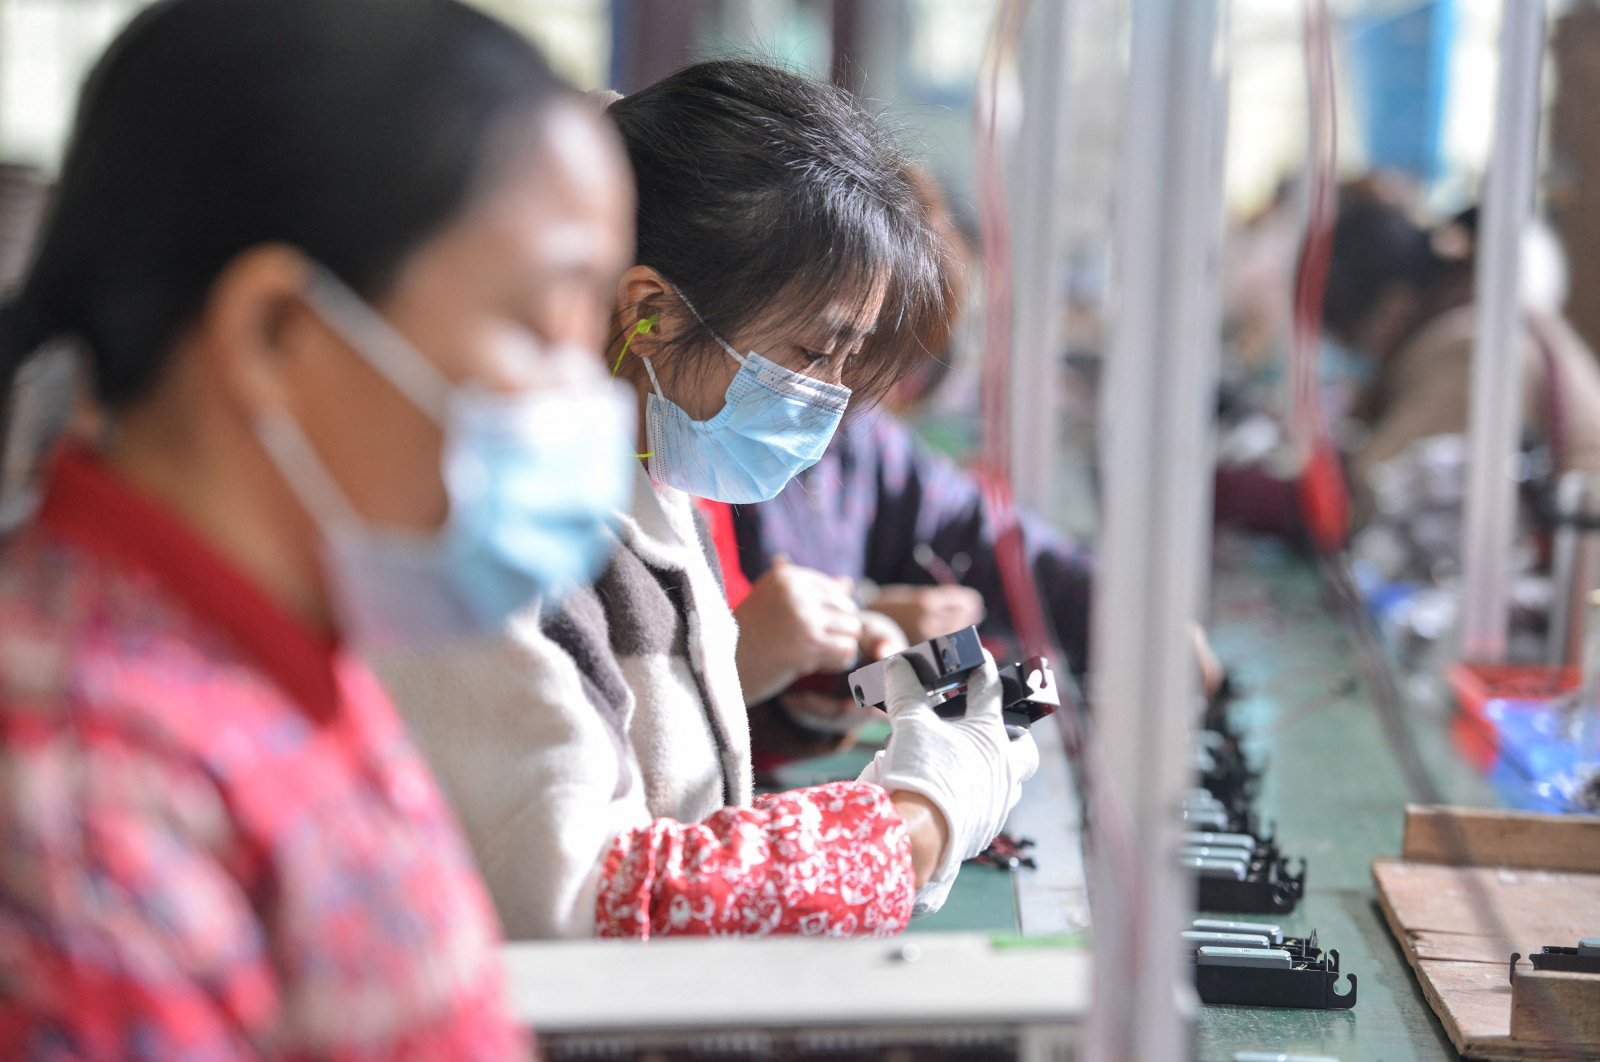 This file photo shows women working on an assembly line producing speakers at a factory in Fuyang, in the eastern Anhui province, China, Nov. 30, 2021. (AFP Photo)